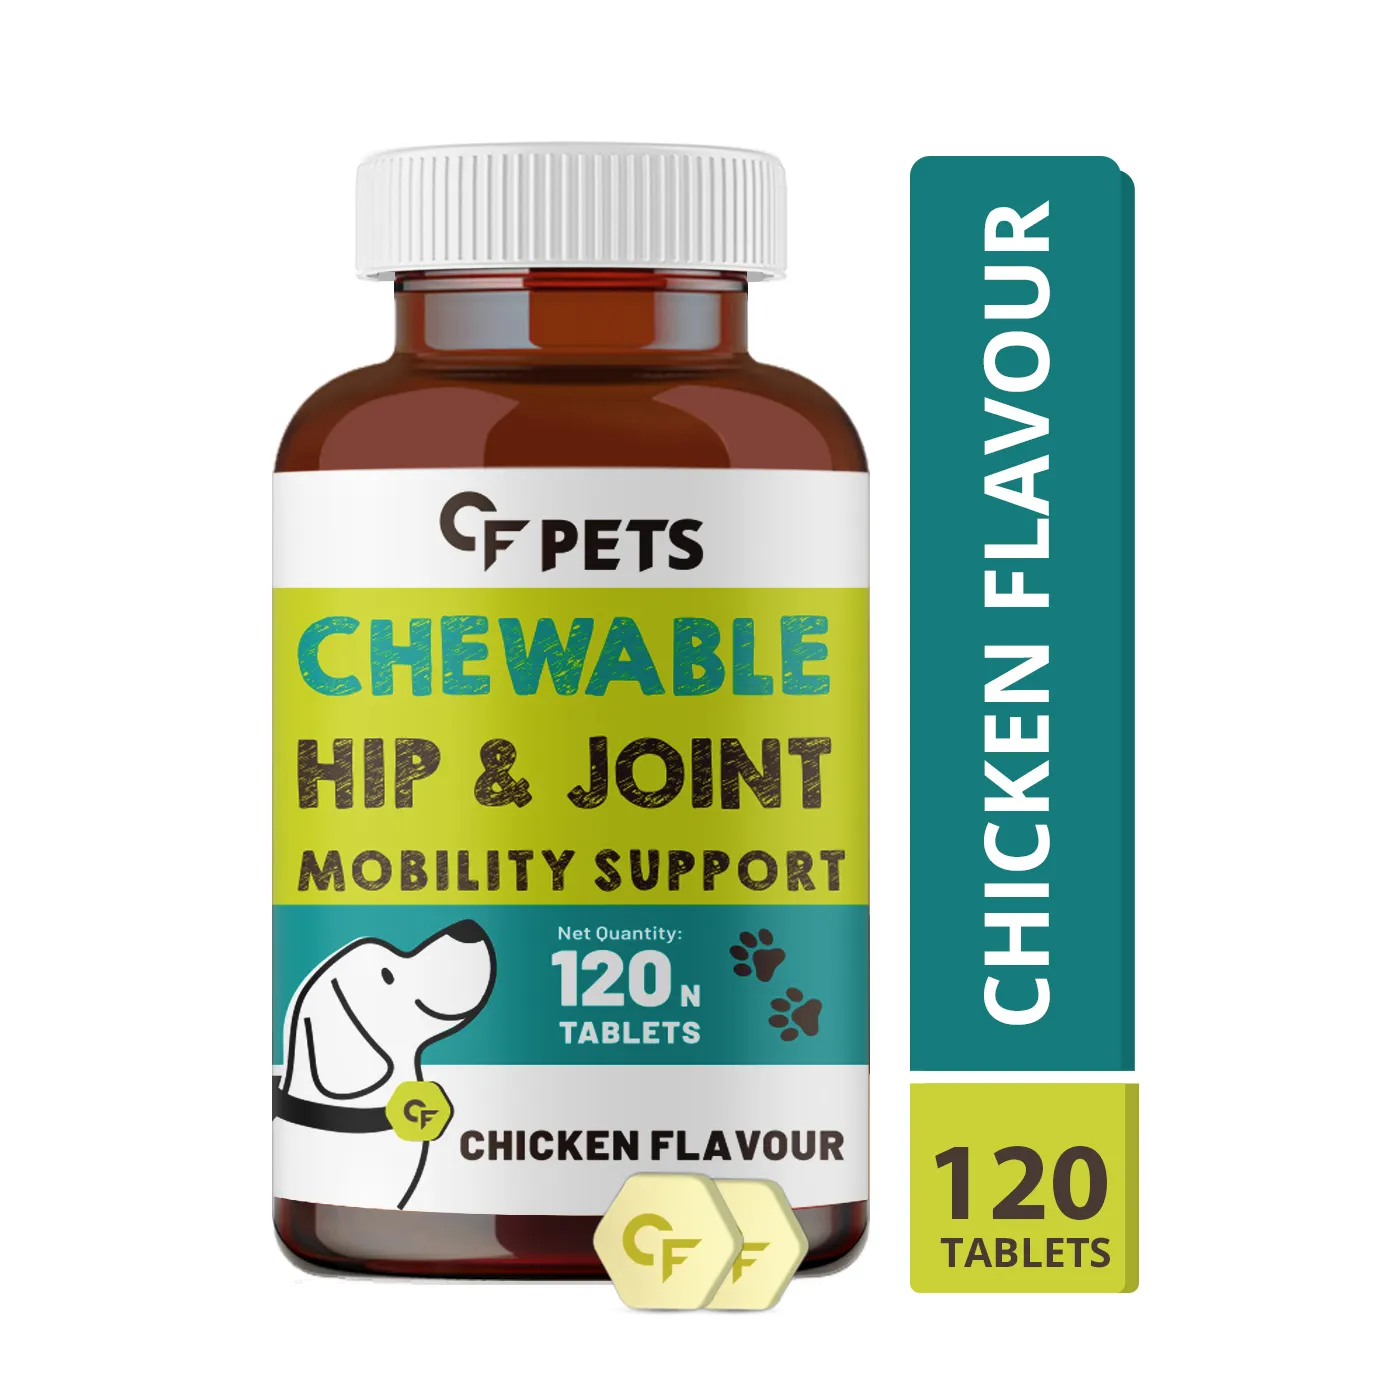 Chewable Hip and Joint Pain Food Supplements for Dogs with Glucosamine, Chondroitin & MSM Complete Mobility & Joint Support